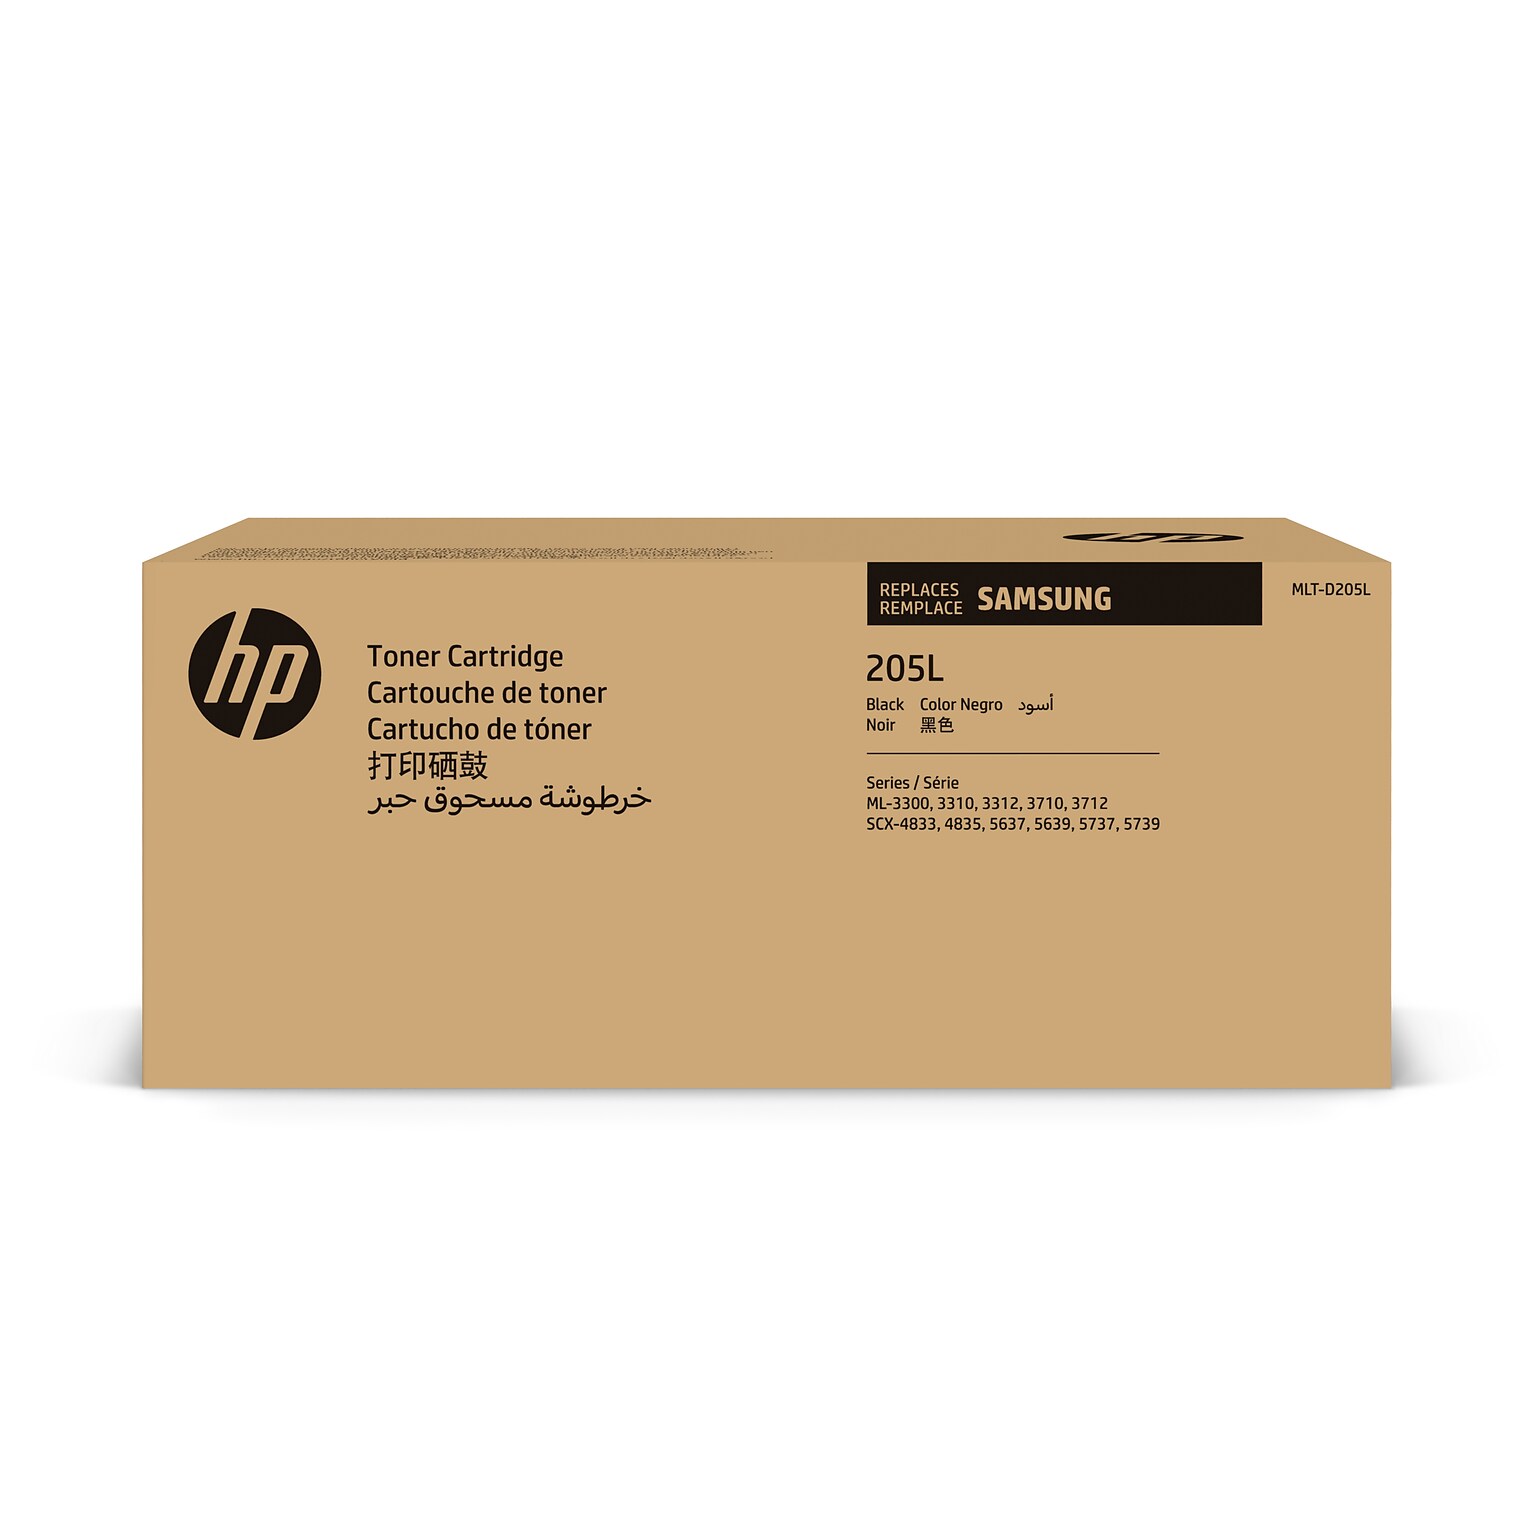 HP 205L Black Toner Cartridge for Samsung MLT-D205L (SU967), Samsung-branded printer supplies are now HP-branded